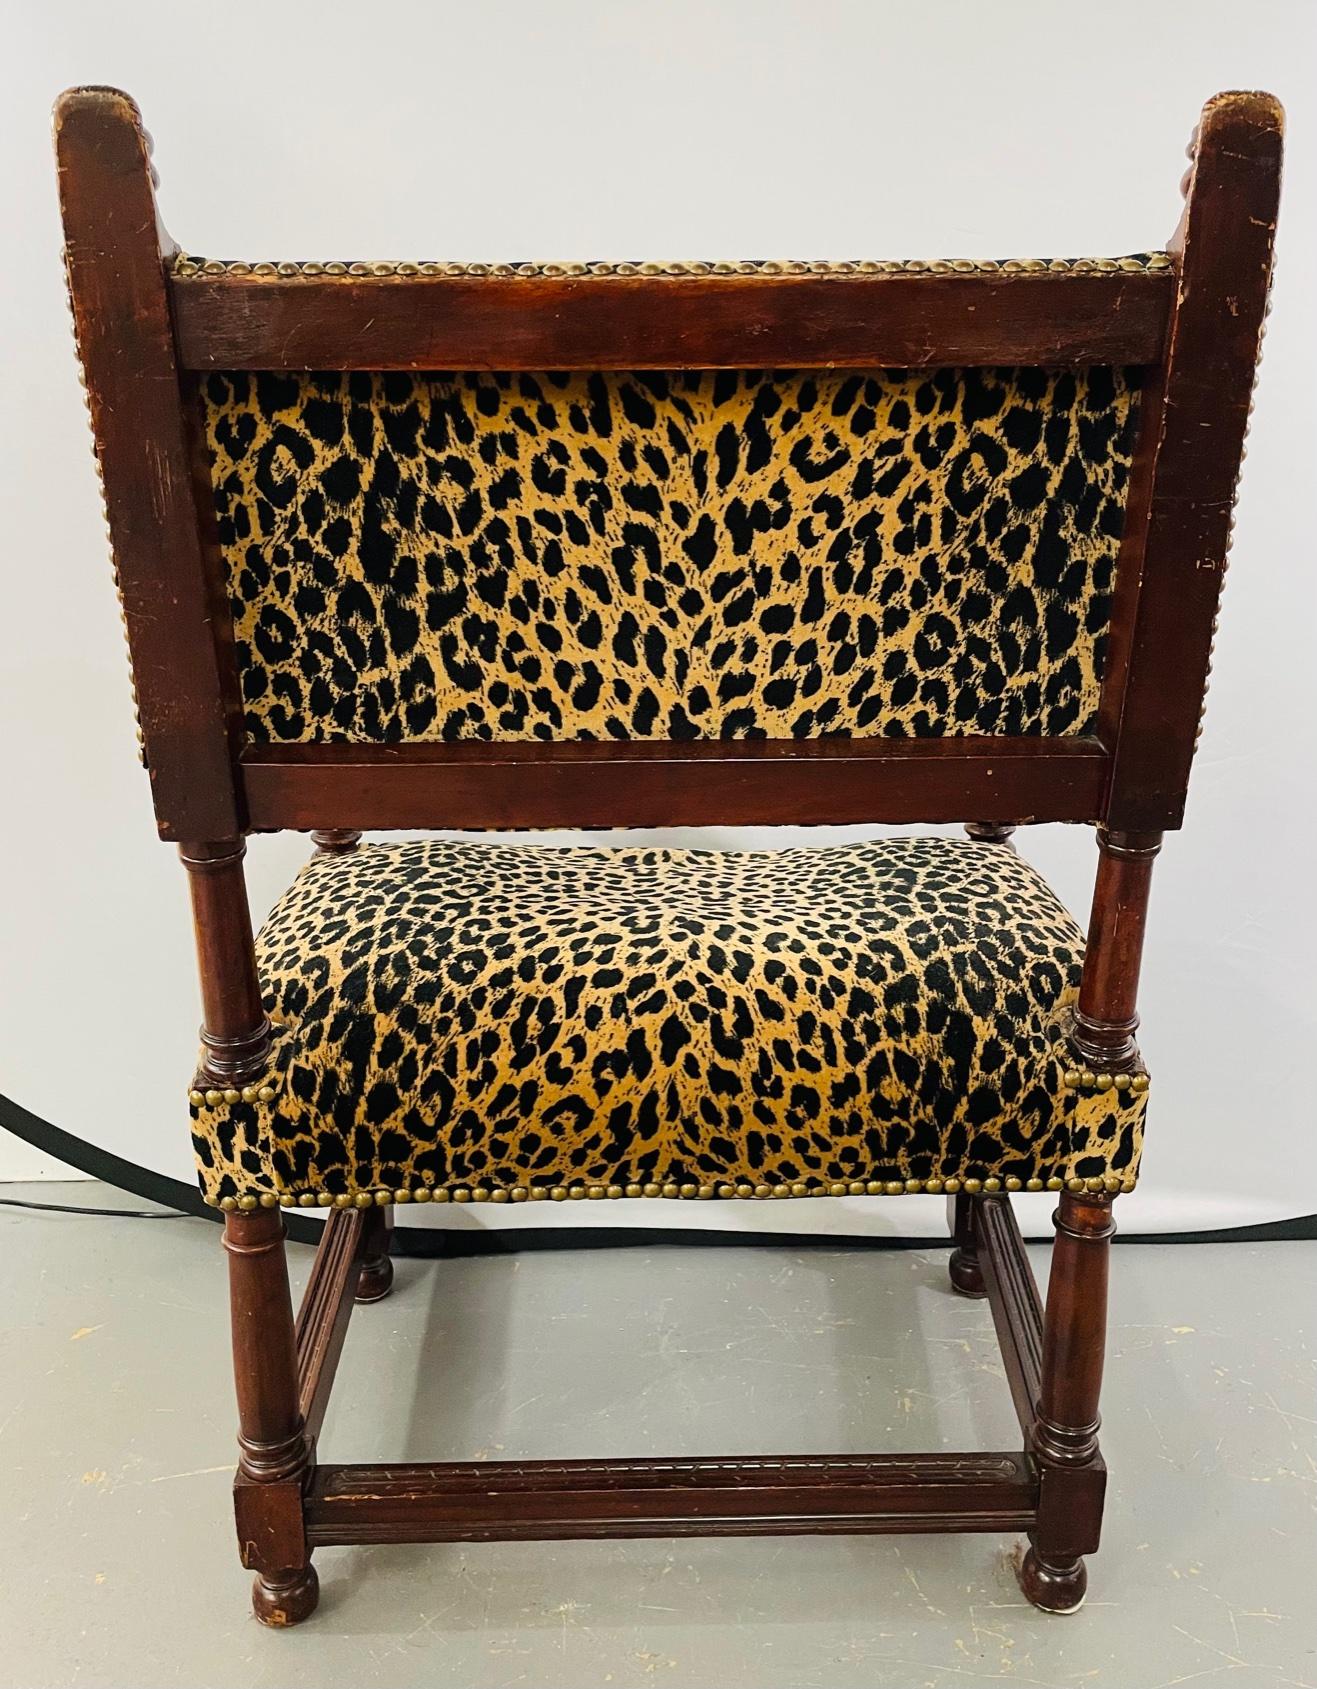 Late 19th Century Victorian Gothic Revival Leopard Upholstery Arm or Side Chair For Sale 11